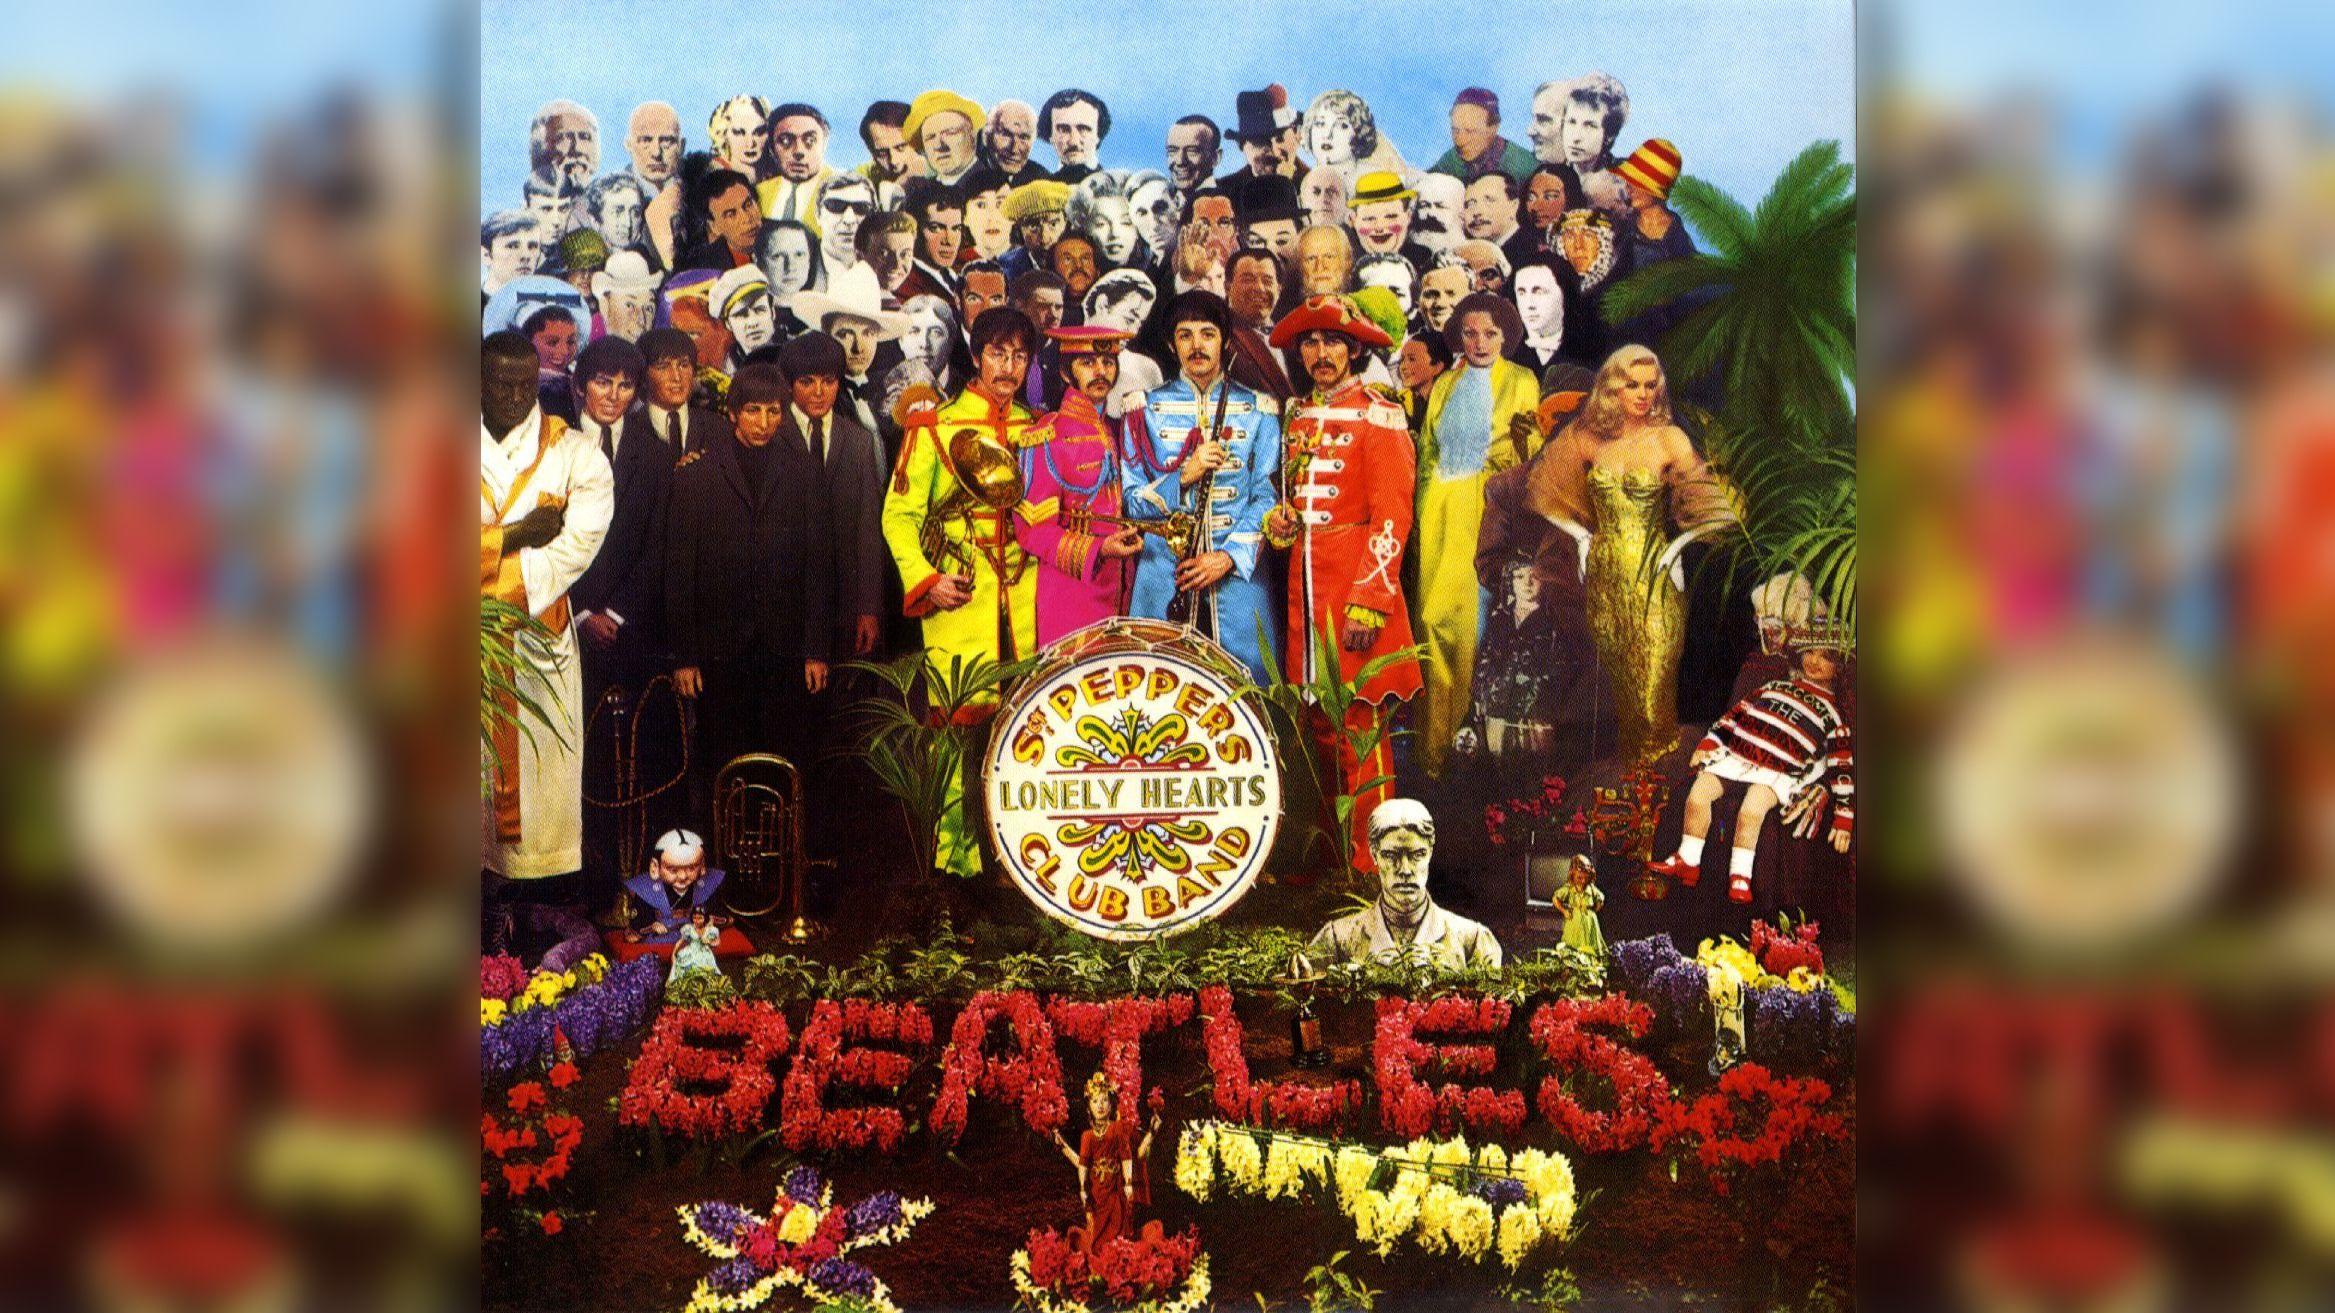 The Beatles Sgt. Pepper Logo - Beatles' 'Sgt. Pepper' Artwork: 10 Things You Didn't Know